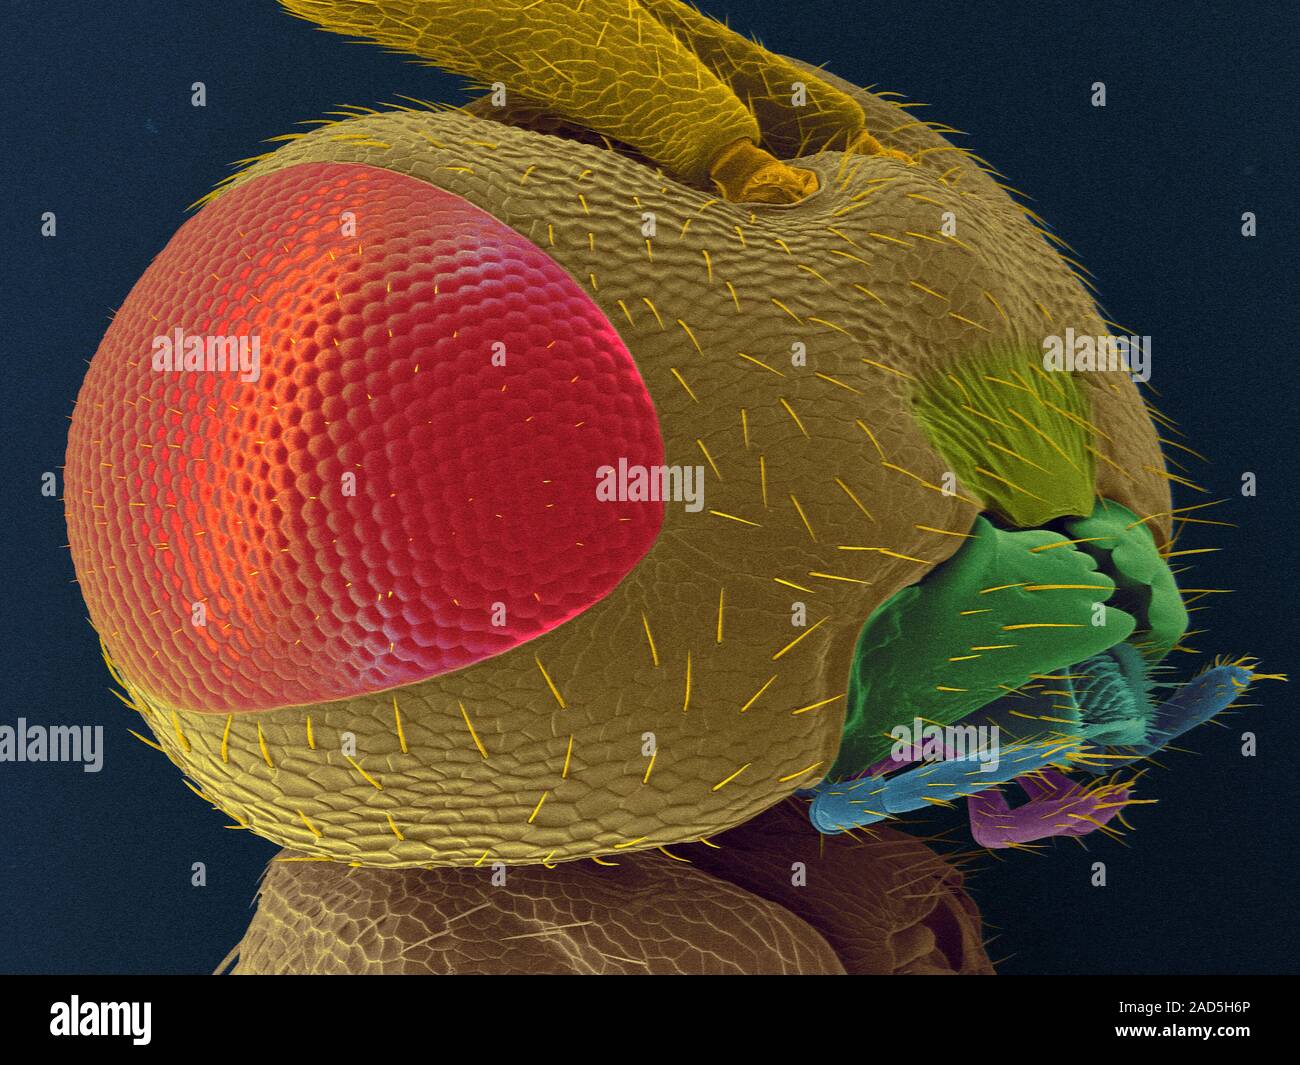 Coloured scanning electron micrograph (SEM) of Male parasitic wasp head (Nasonia vitripennis). Nasonia is a genus of Pteromalid parasitoid wasps that Stock Photo